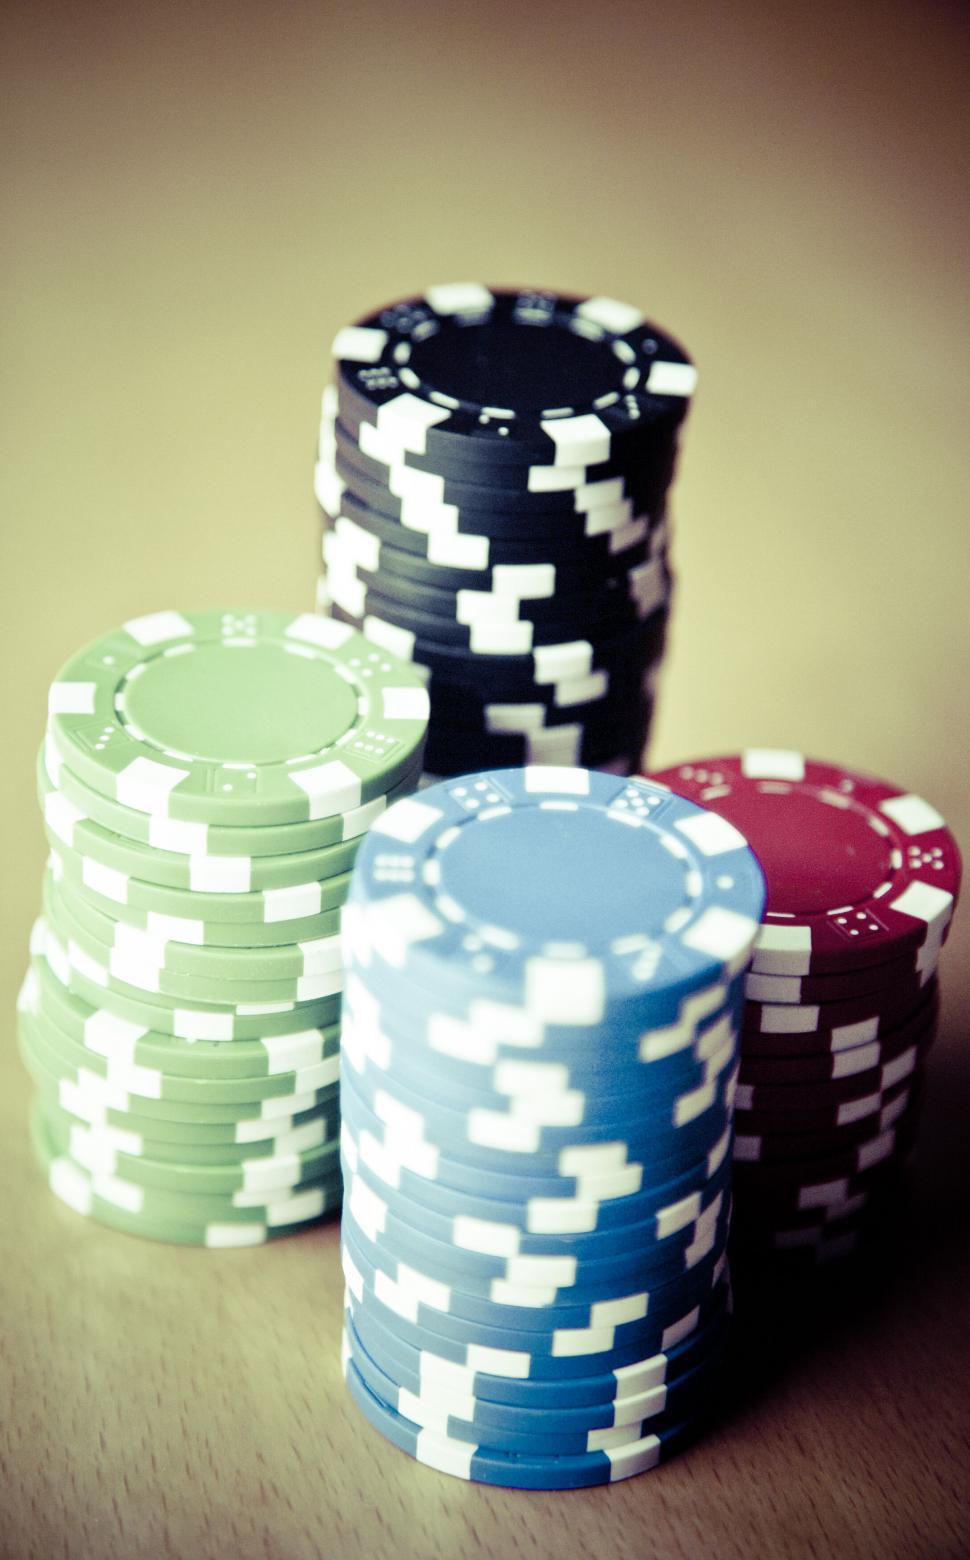 Free Image of Stacked colorful gambling chips 